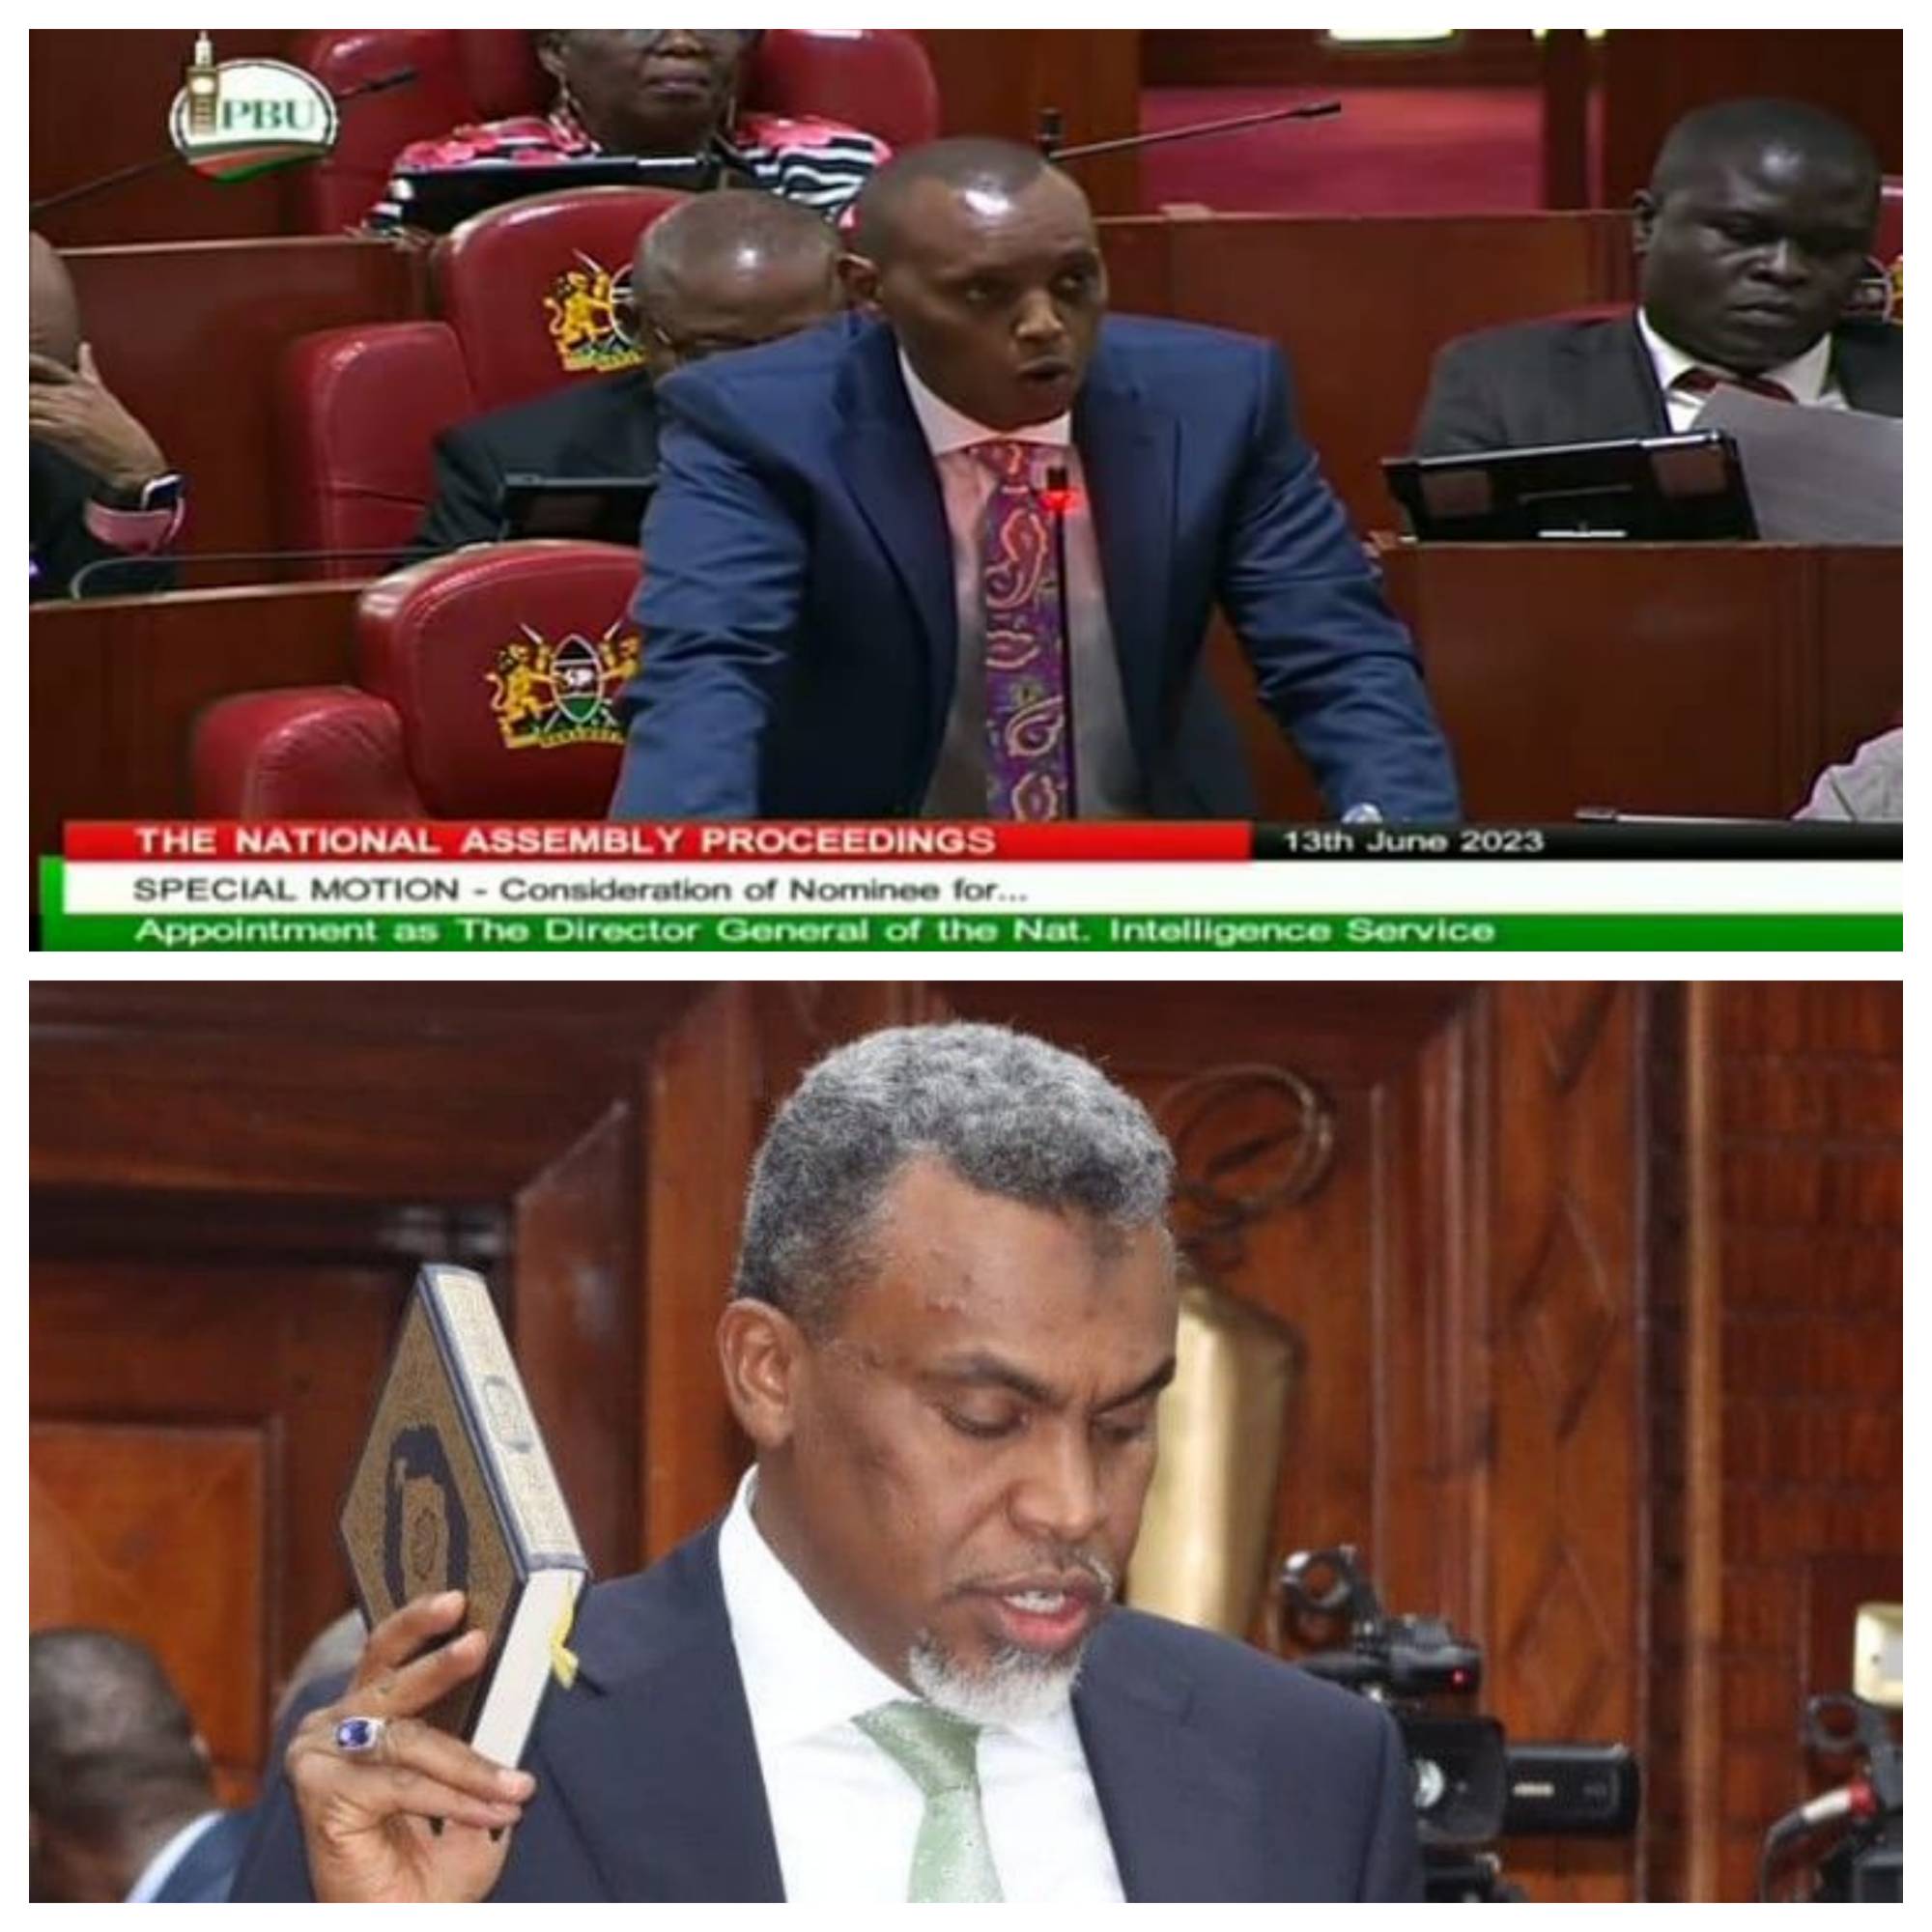 HE NATIONAL ASSEMBLY  APPROVES NOORDIN HAJI FOR APPOINTMENT AS NATIONAL INTELLIGENCE SERVICE BOSS